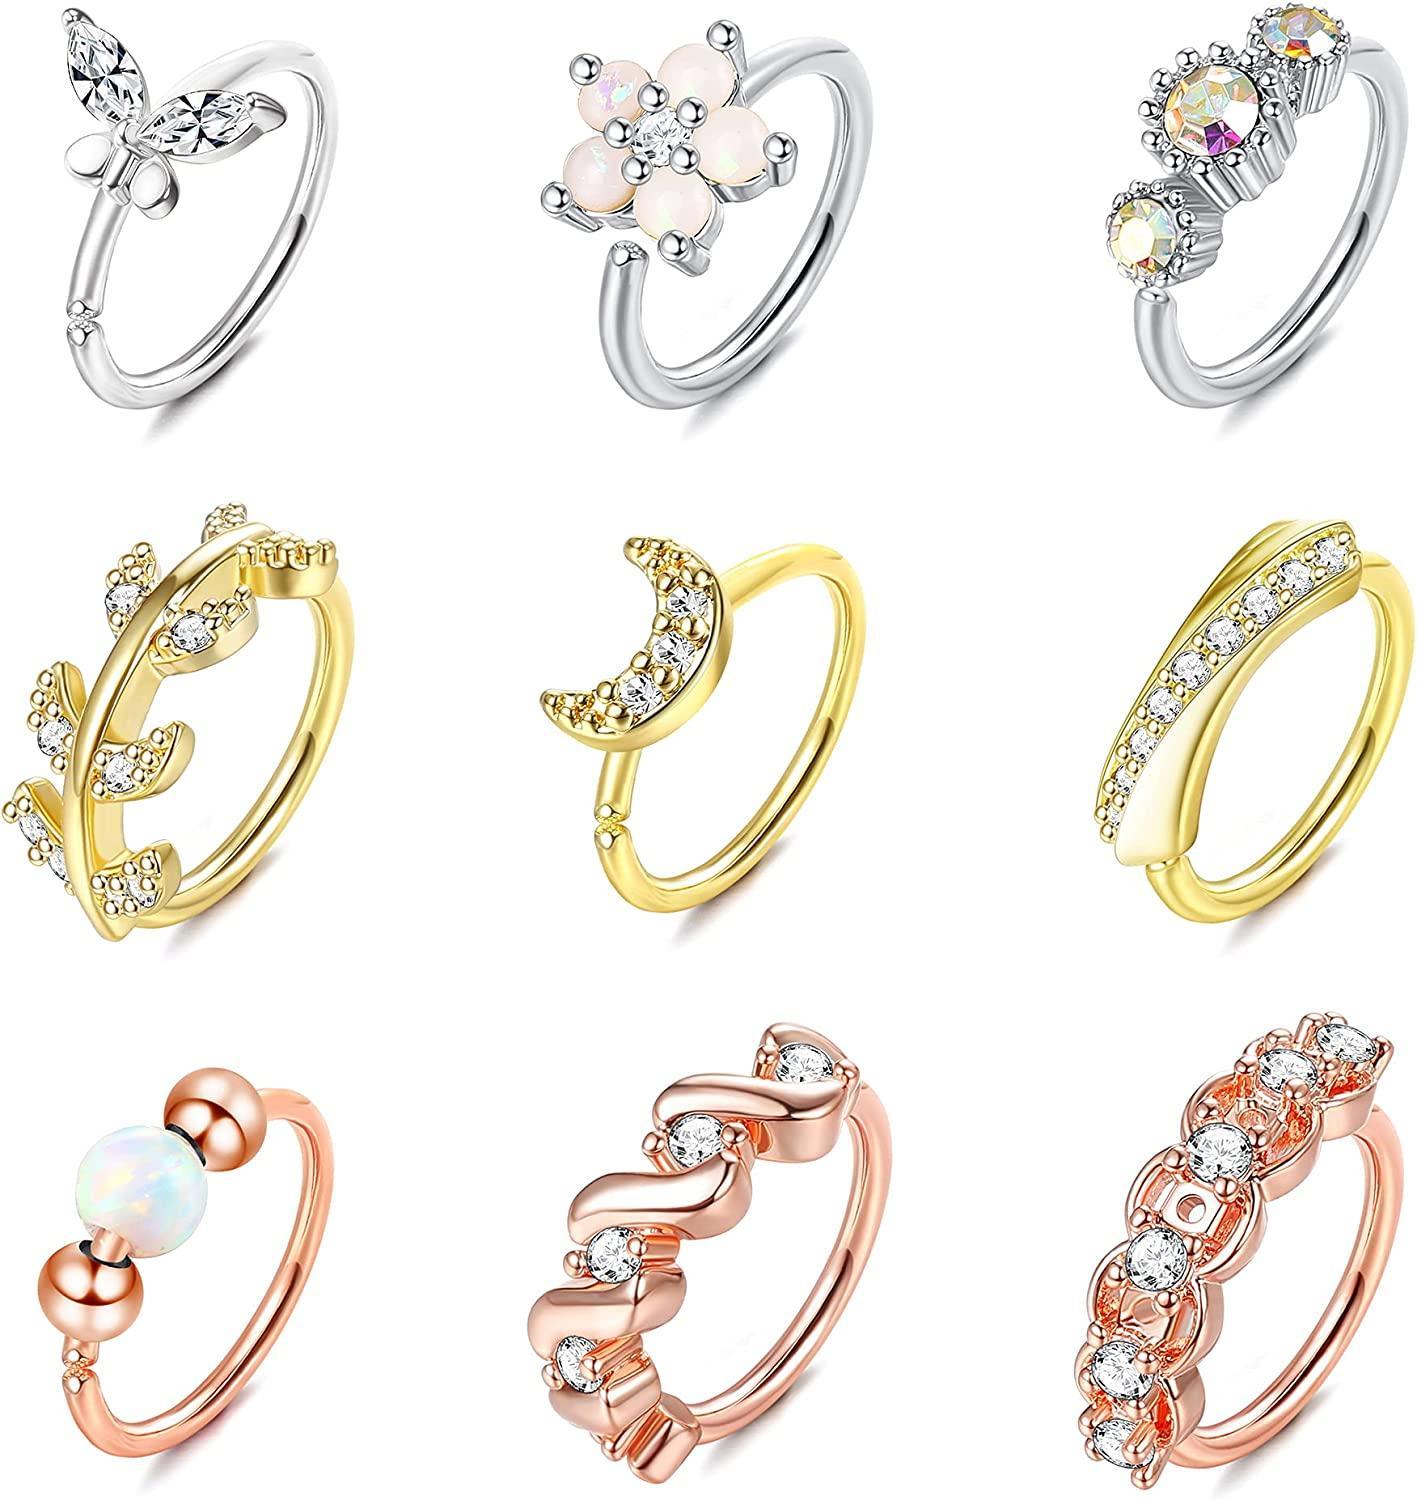 A variety of 9Pcs 20G Stainless Steel Nose Ring Hoop for Women Men in silver, gold, and rose gold tones, each decorated with different elements like pearls, crystals, floral motifs, and cartilage hoop rings.